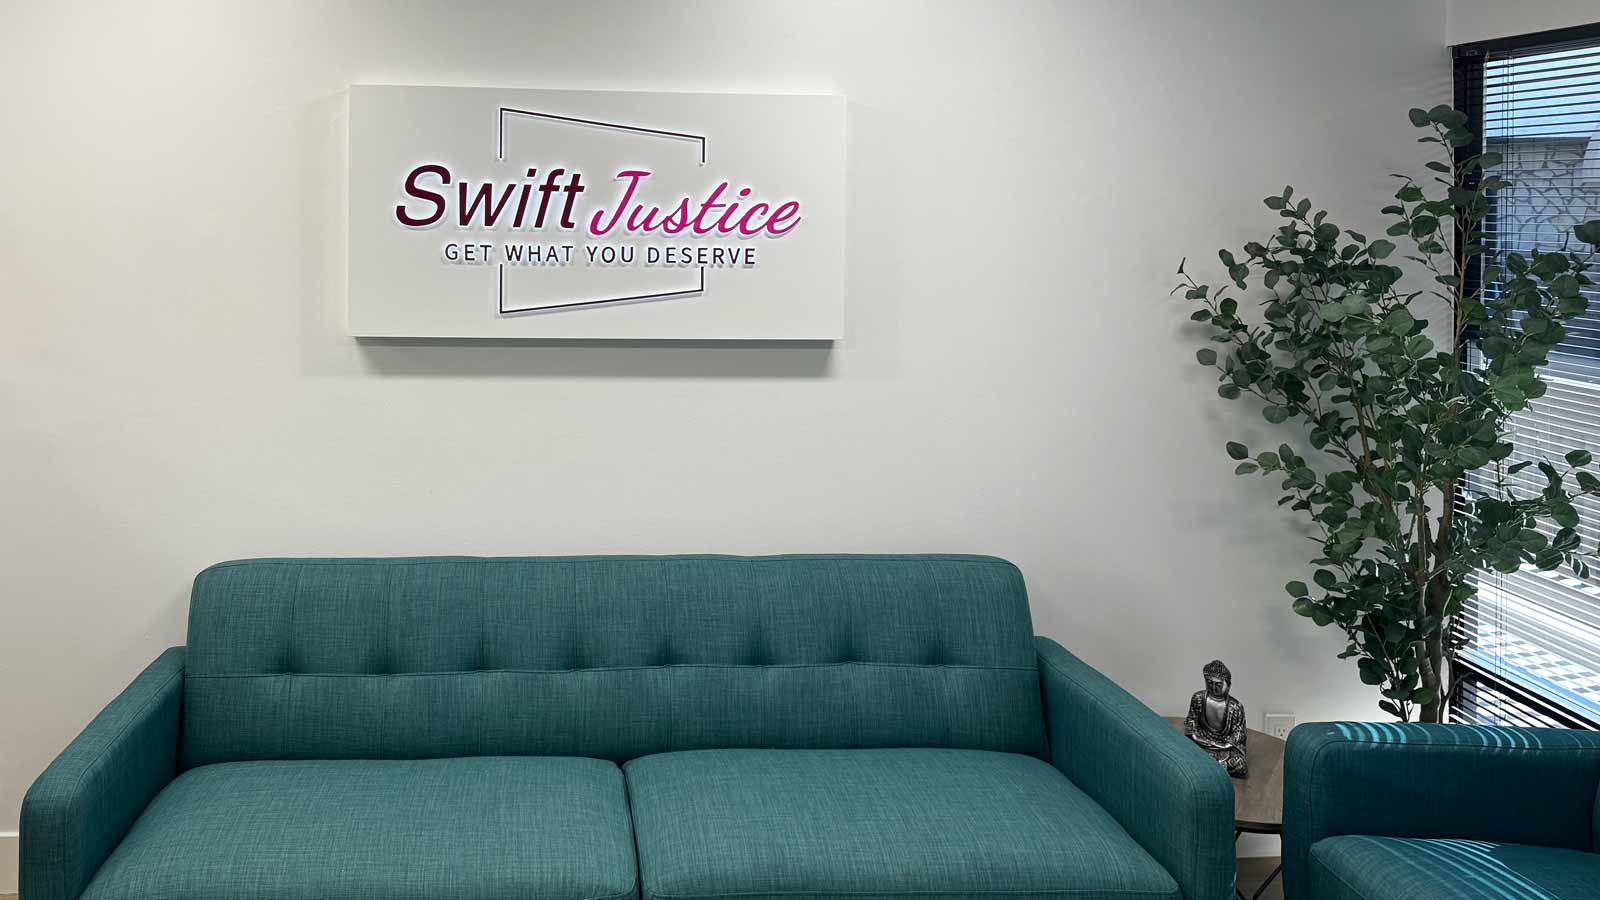 swift justice inc lobby sign installed at the reception